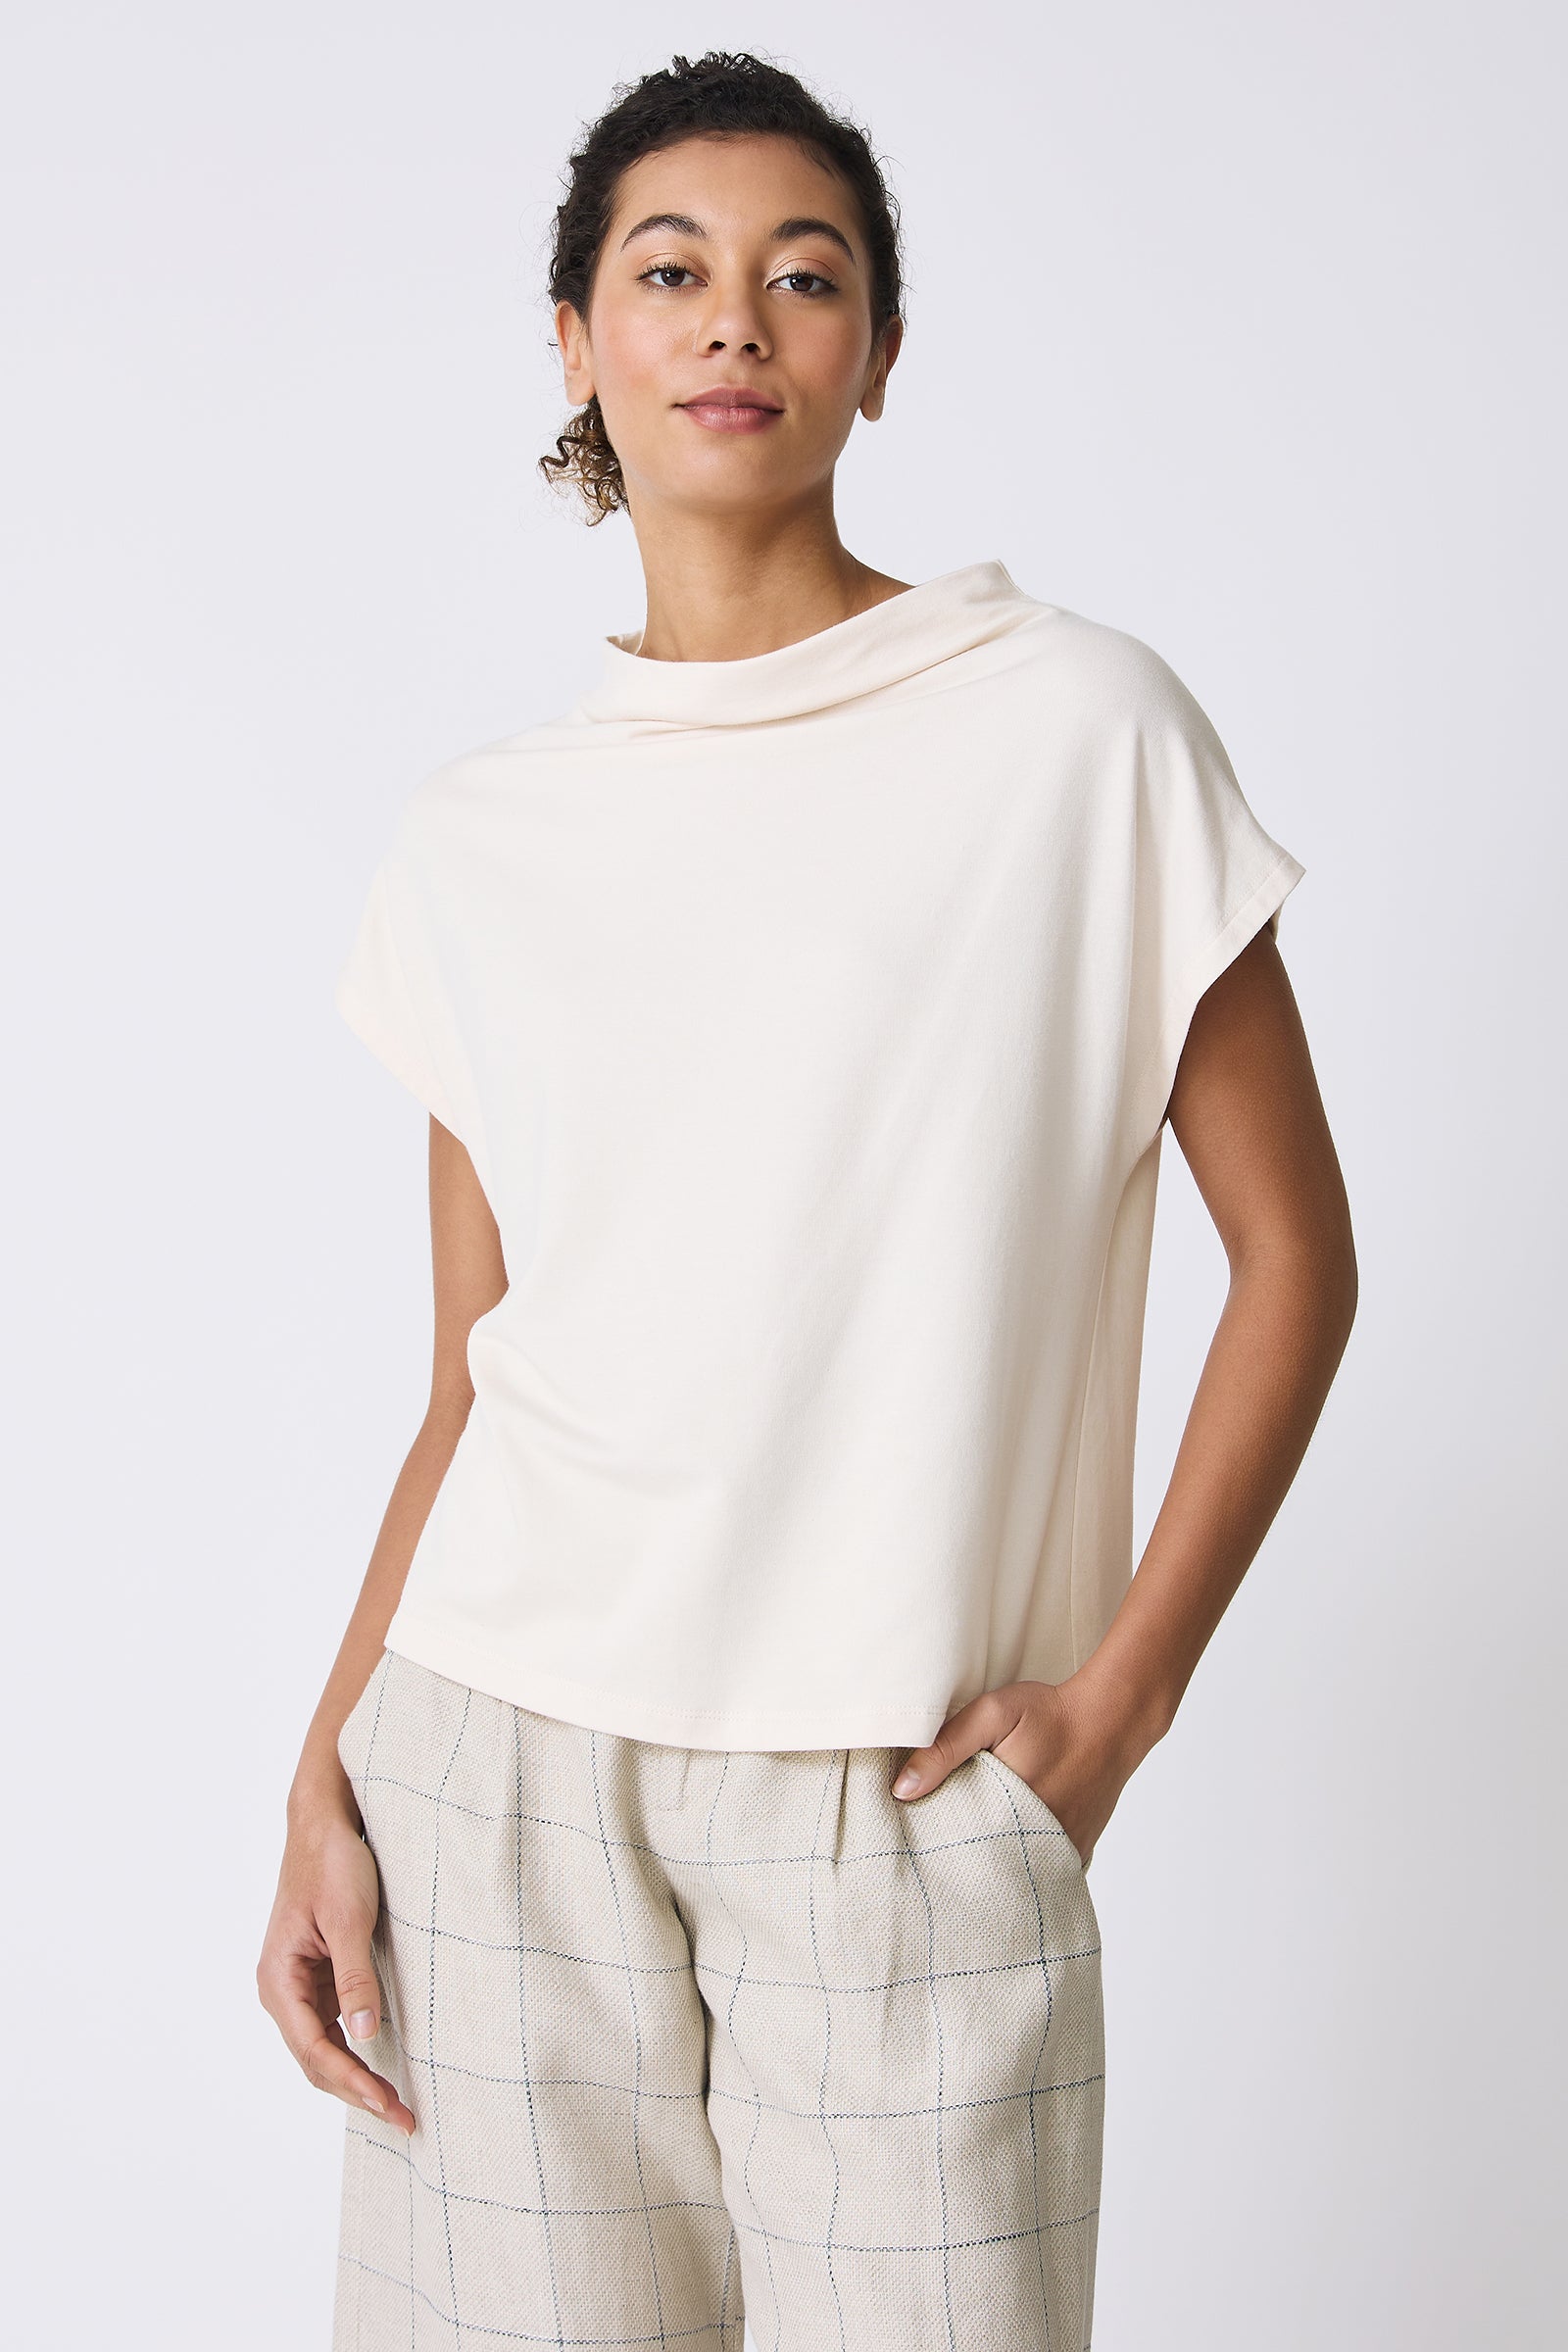 Kal Rieman Luca Cowl Top in Ivory on model with hand in pocket front view